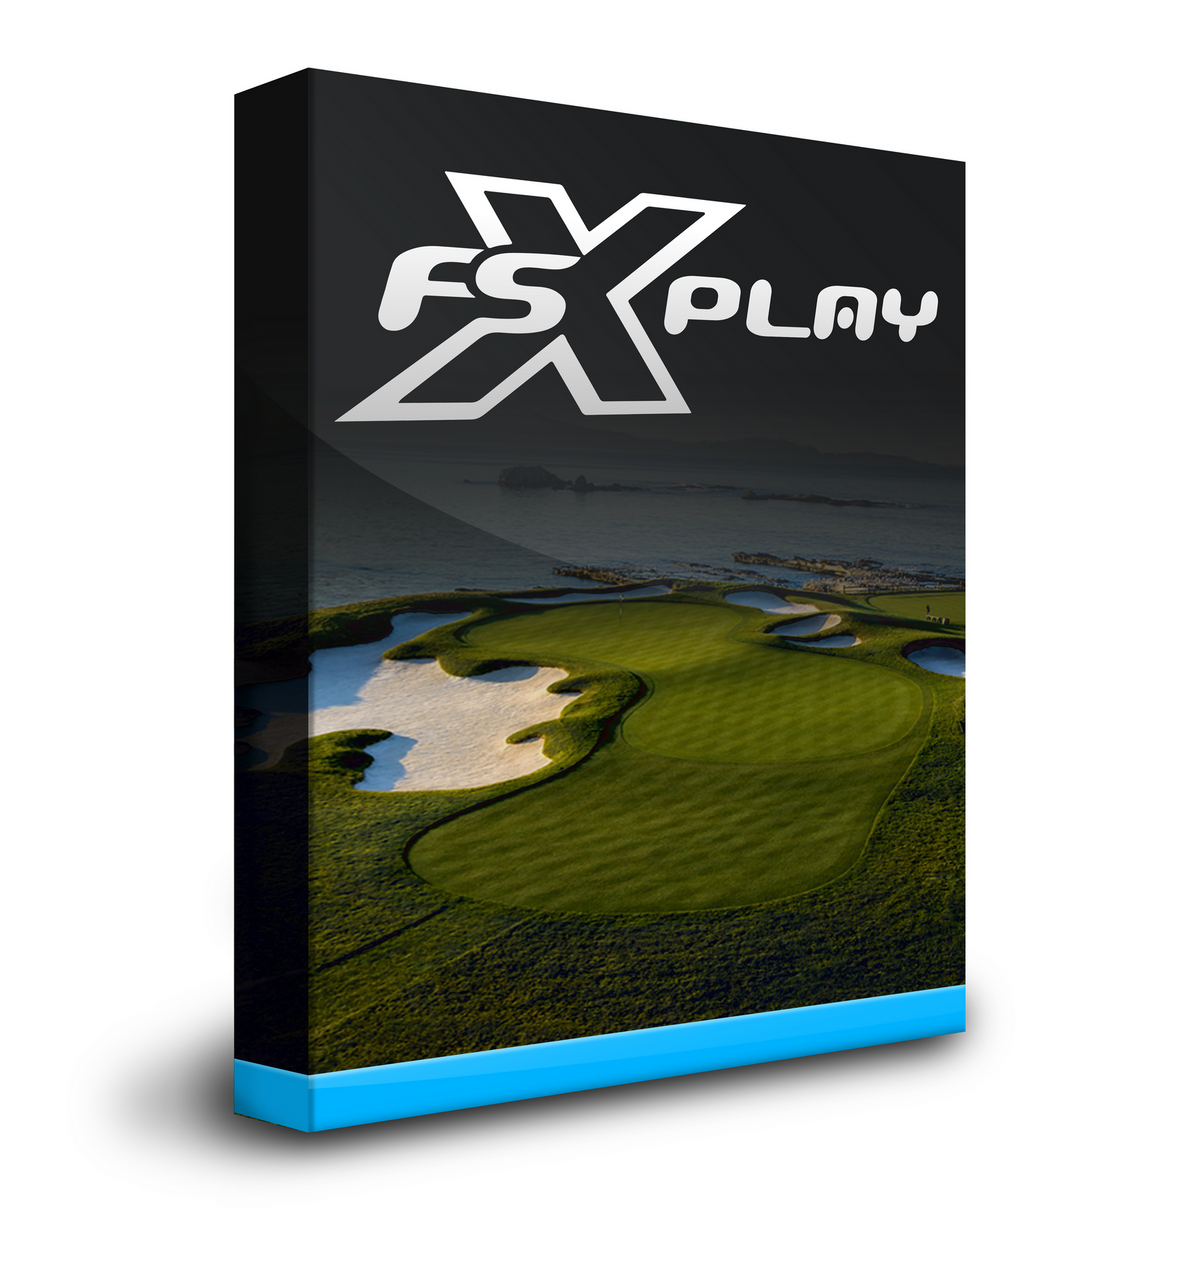 Includes FSX Play Software Box